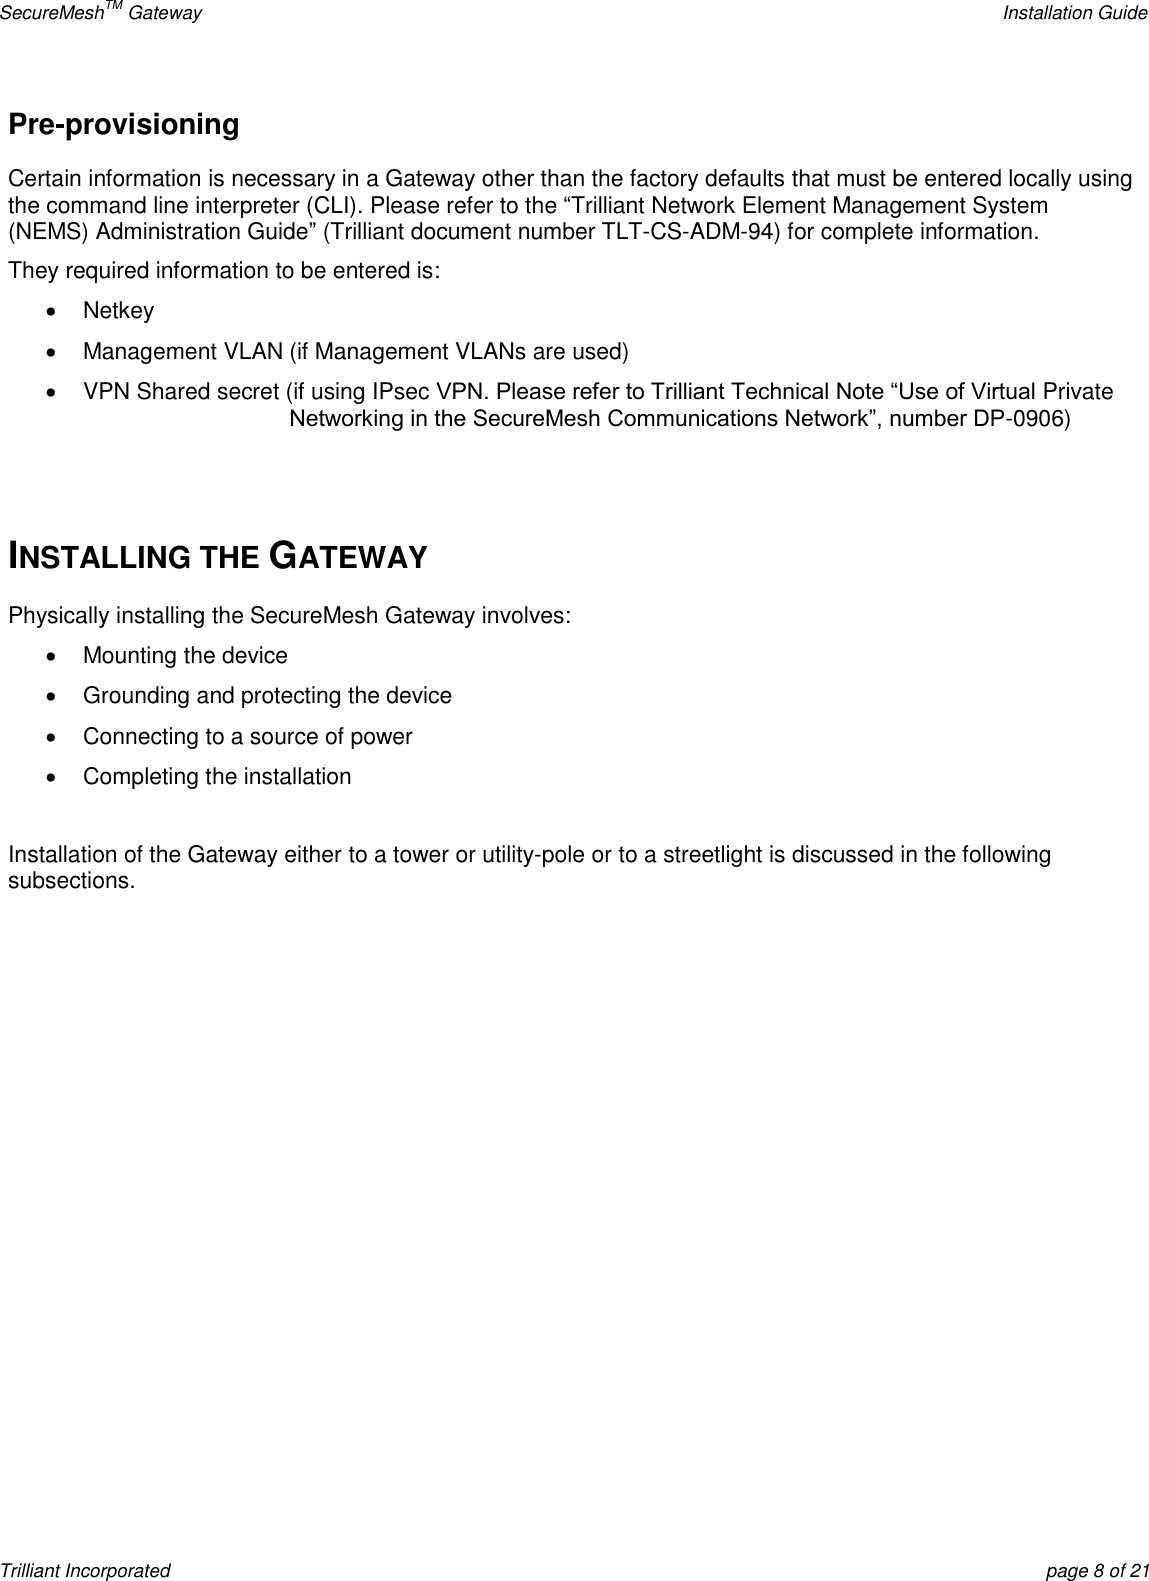 SecureMeshTM Gateway    Installation Guide Trilliant Incorporated  page 8 of 21 Pre-provisioning Certain information is necessary in a Gateway other than the factory defaults that must be entered locally using the command line interpreter (CLI). Please refer to the ―Trilliant Network Element Management System (NEMS) Administration Guide‖ (Trilliant document number TLT-CS-ADM-94) for complete information. They required information to be entered is:   Netkey   Management VLAN (if Management VLANs are used)   VPN Shared secret (if using IPsec VPN. Please refer to Trilliant Technical Note ―Use of Virtual Private Networking in the SecureMesh Communications Network‖, number DP-0906)   INSTALLING THE GATEWAY Physically installing the SecureMesh Gateway involves:   Mounting the device   Grounding and protecting the device   Connecting to a source of power   Completing the installation  Installation of the Gateway either to a tower or utility-pole or to a streetlight is discussed in the following subsections.   